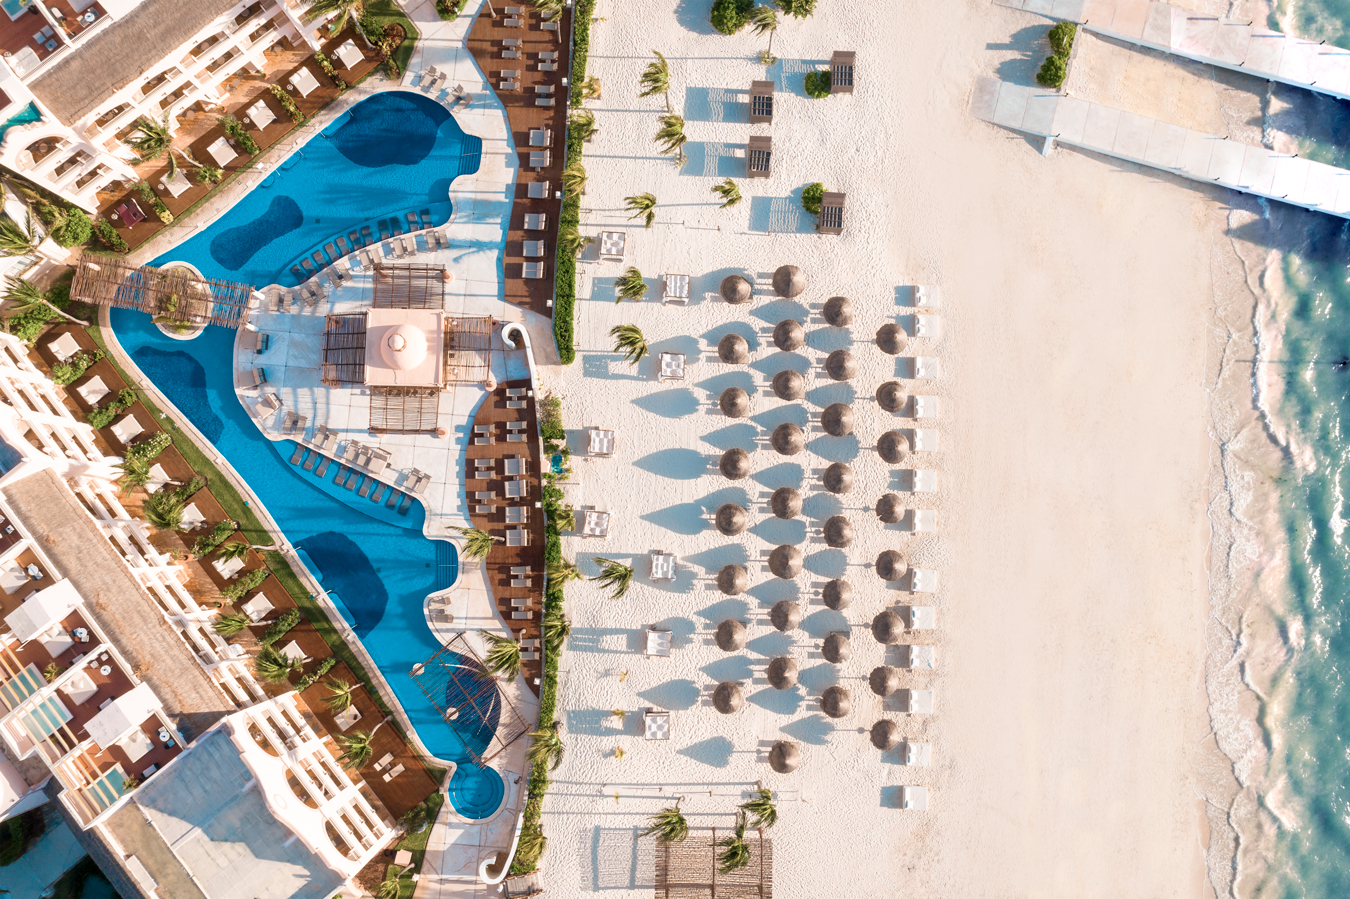 Overview of Excellence Riviera Cancun 